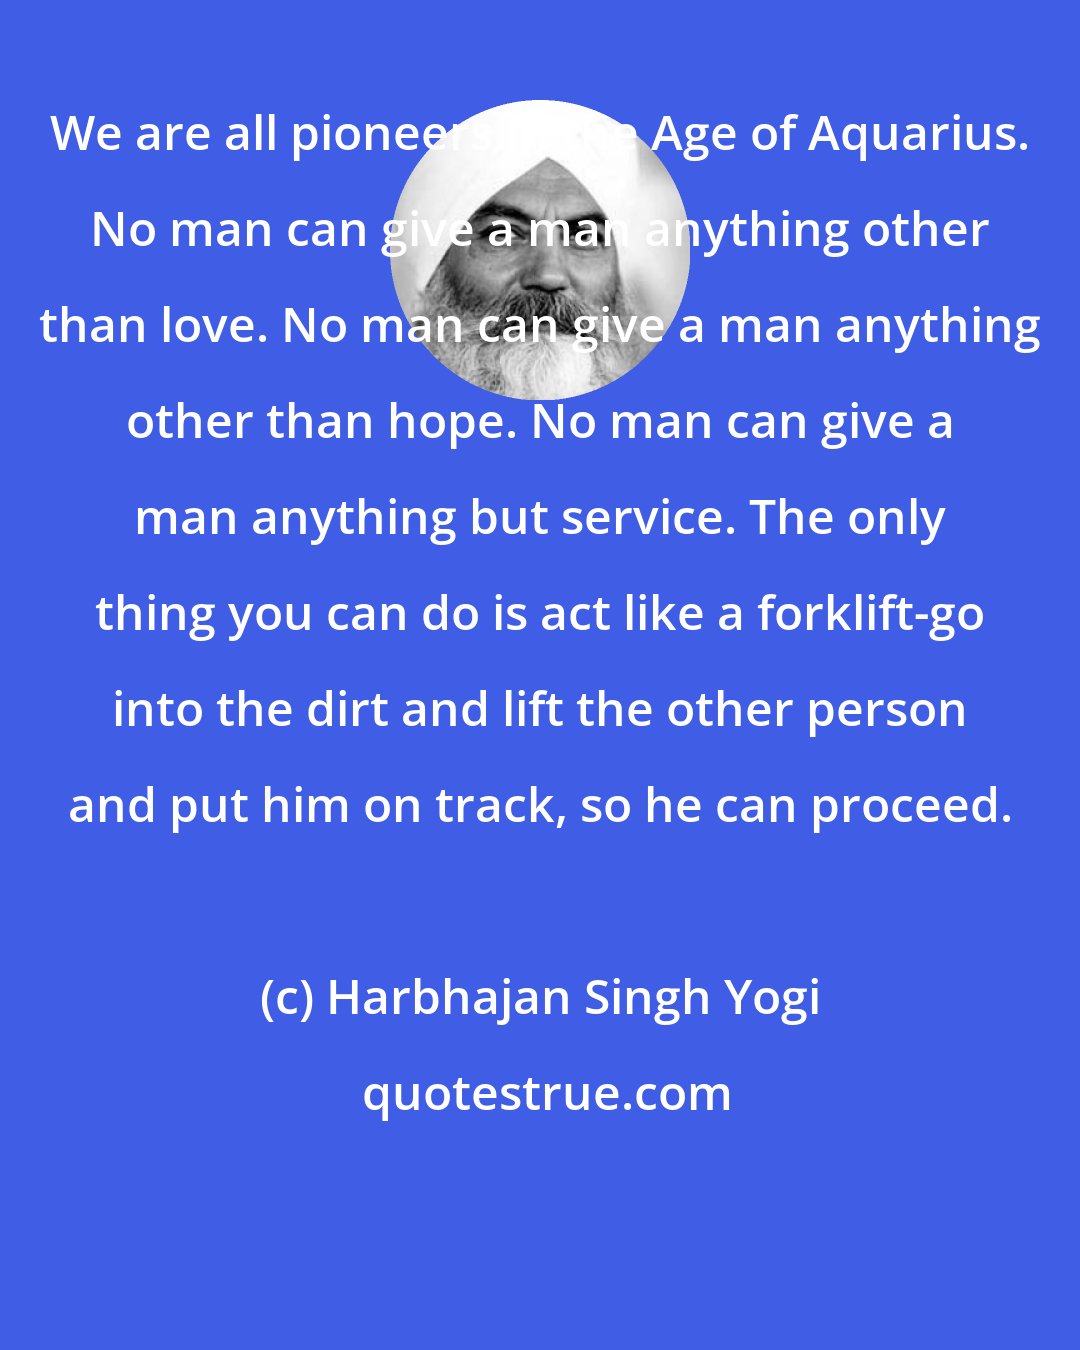 Harbhajan Singh Yogi: We are all pioneers in the Age of Aquarius. No man can give a man anything other than love. No man can give a man anything other than hope. No man can give a man anything but service. The only thing you can do is act like a forklift-go into the dirt and lift the other person and put him on track, so he can proceed.